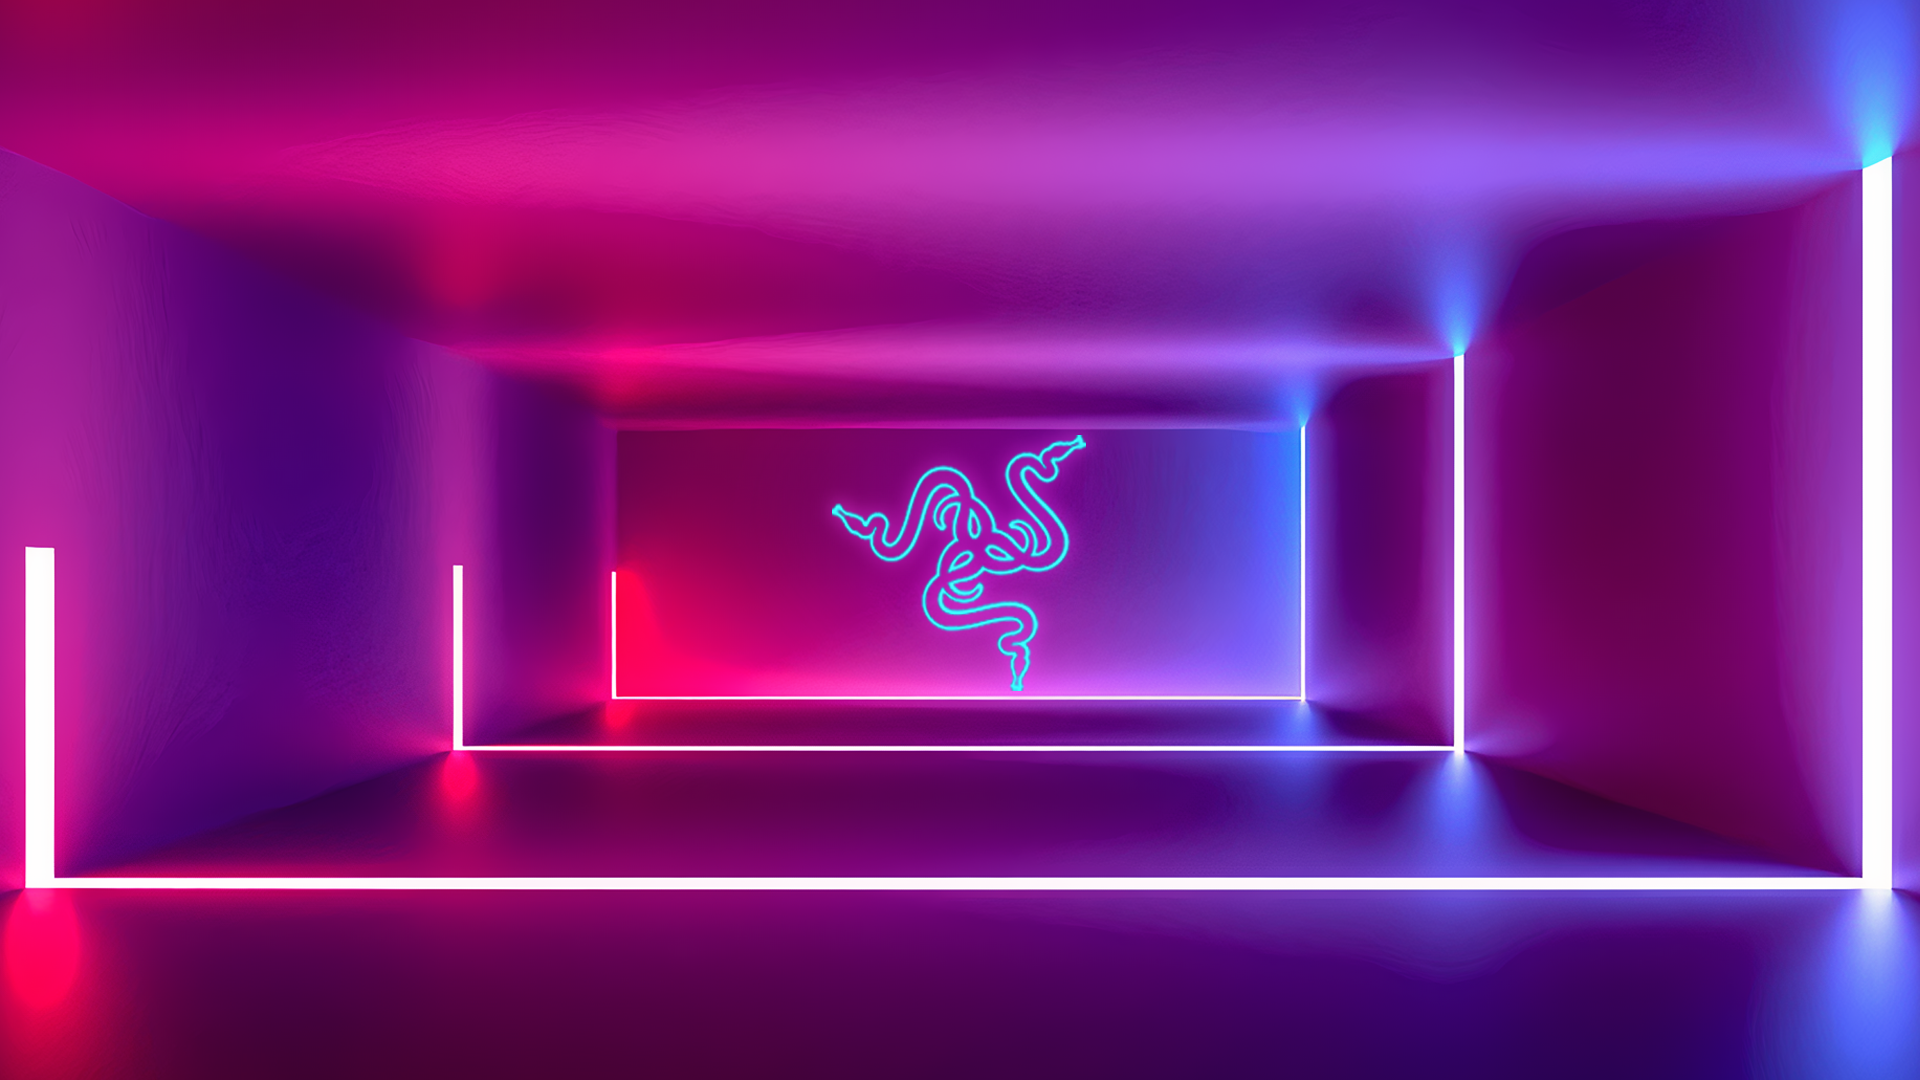 Made couple Razer neon themed wallpaper for Desktop and phones everything is 1080p UwU (not sure if these belong here)